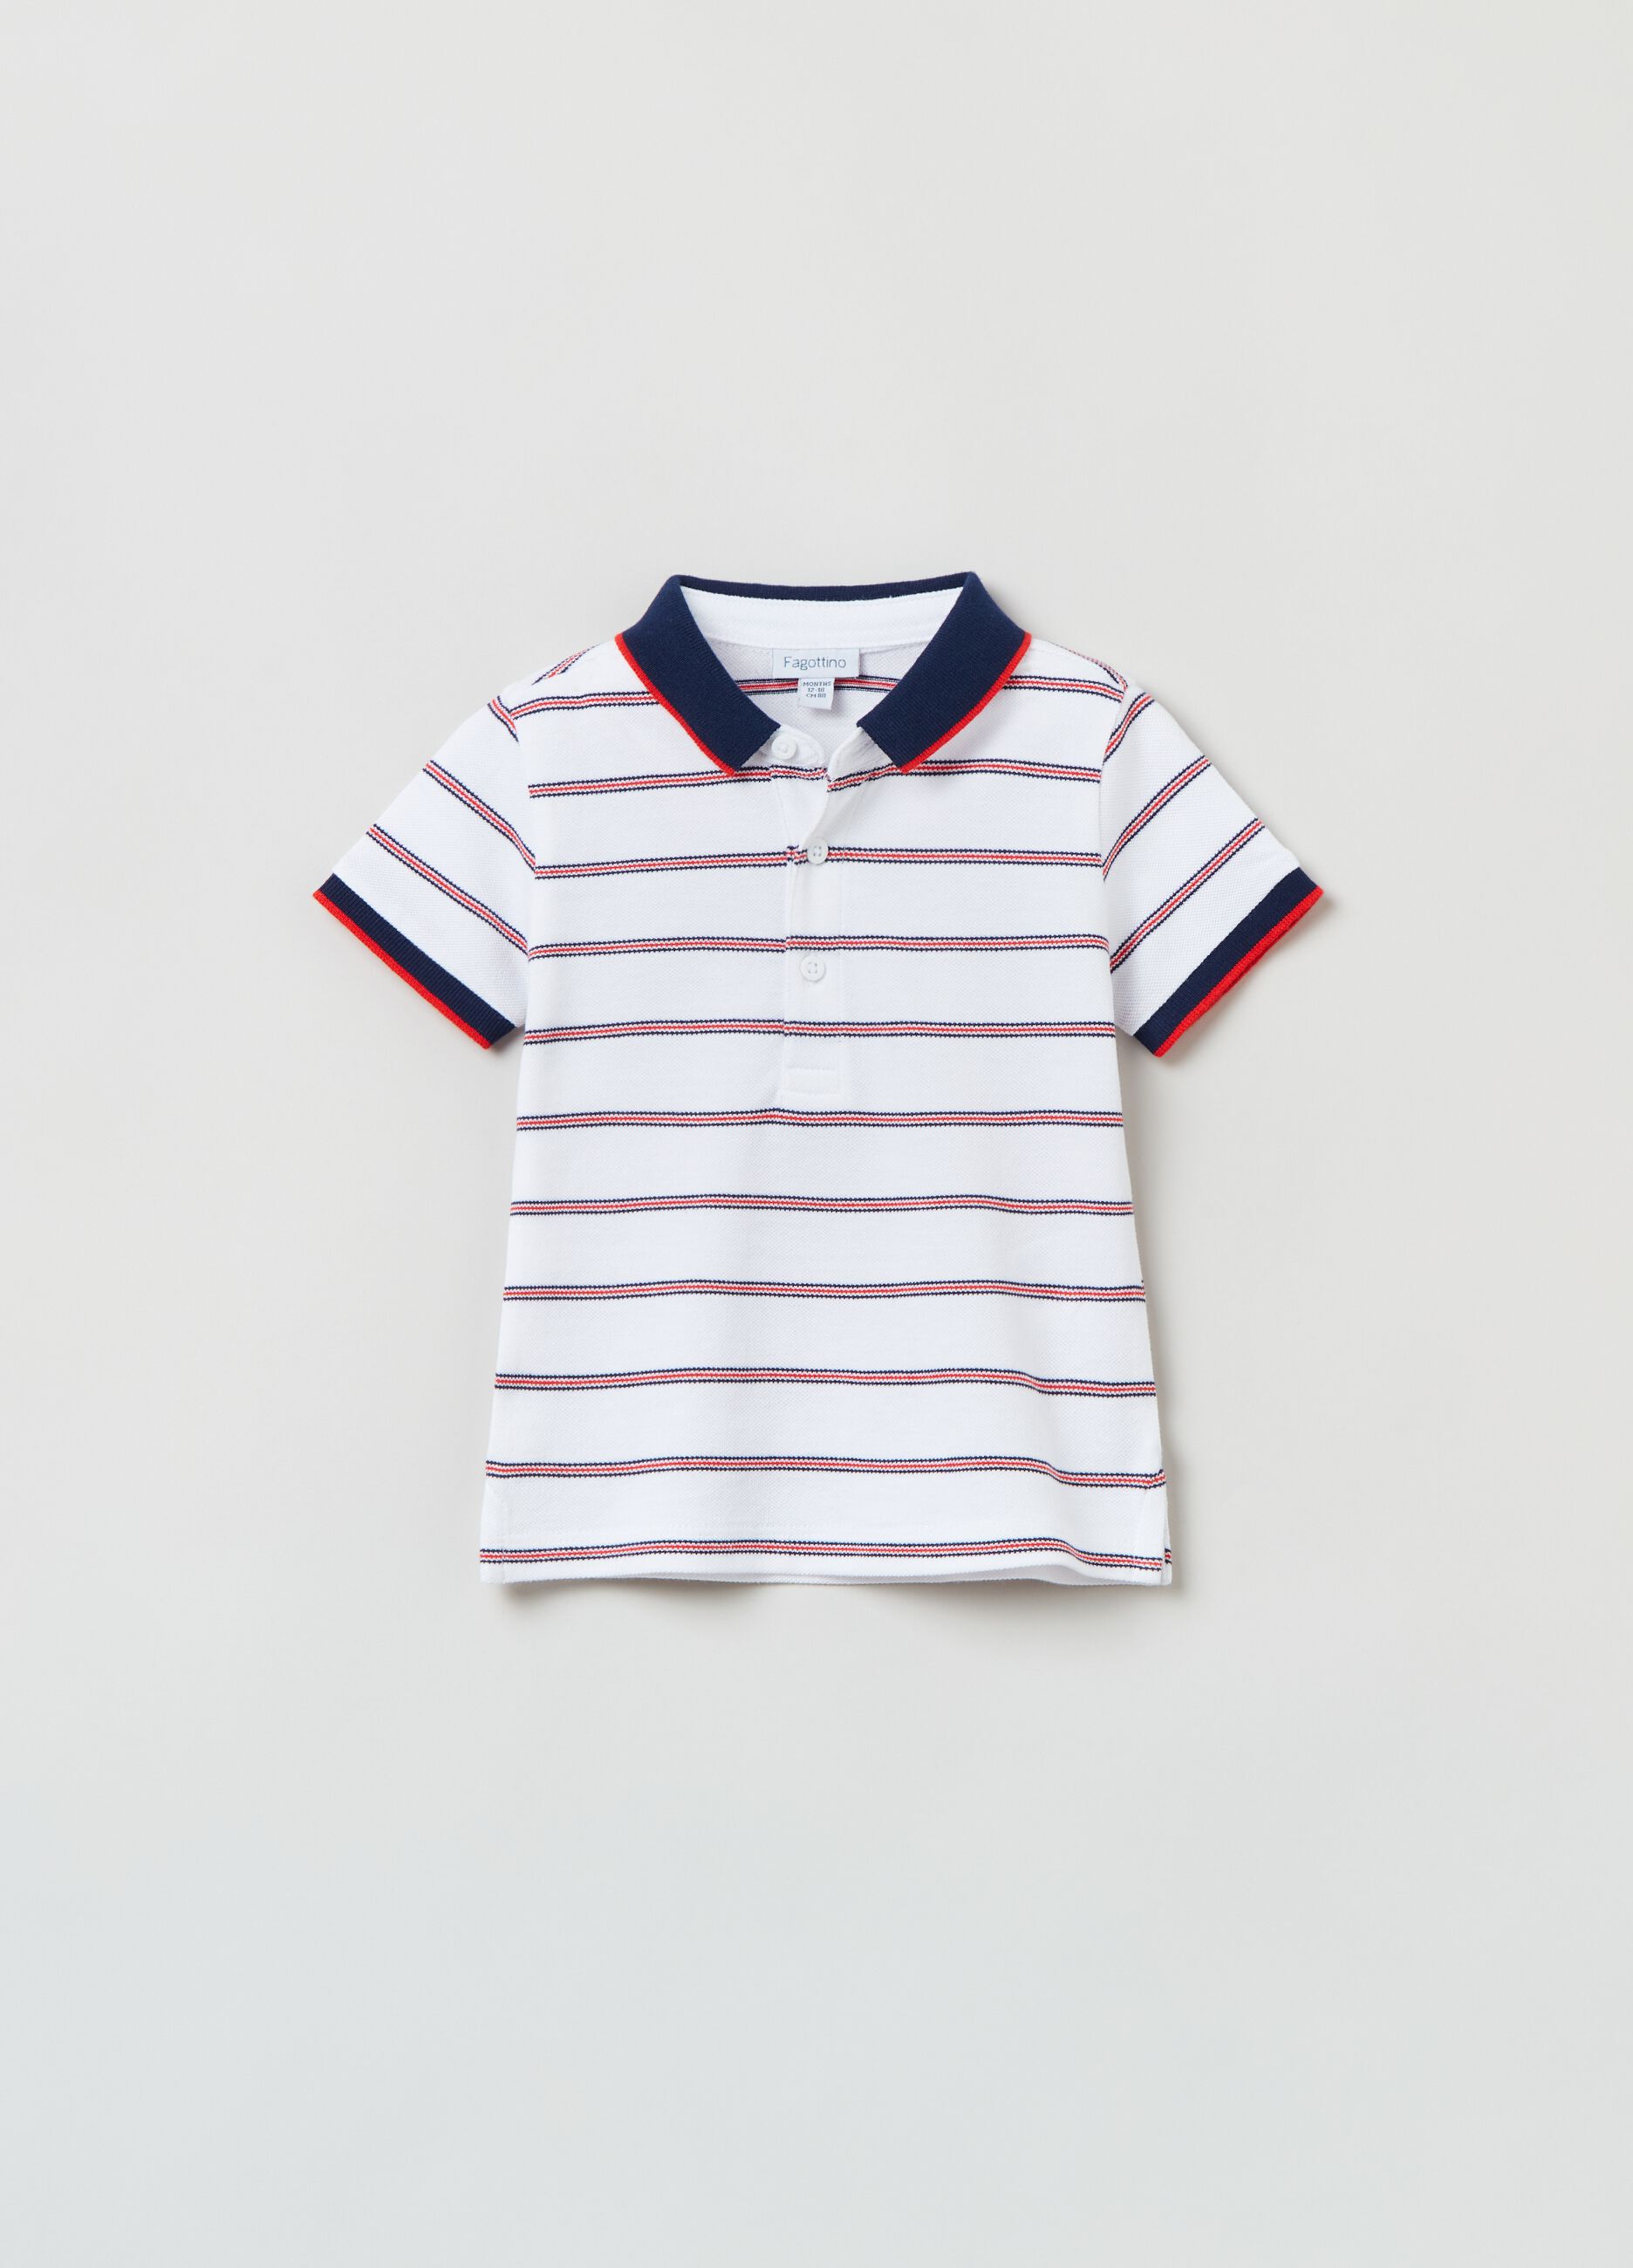 Polo shirt in cotton with stripes print.